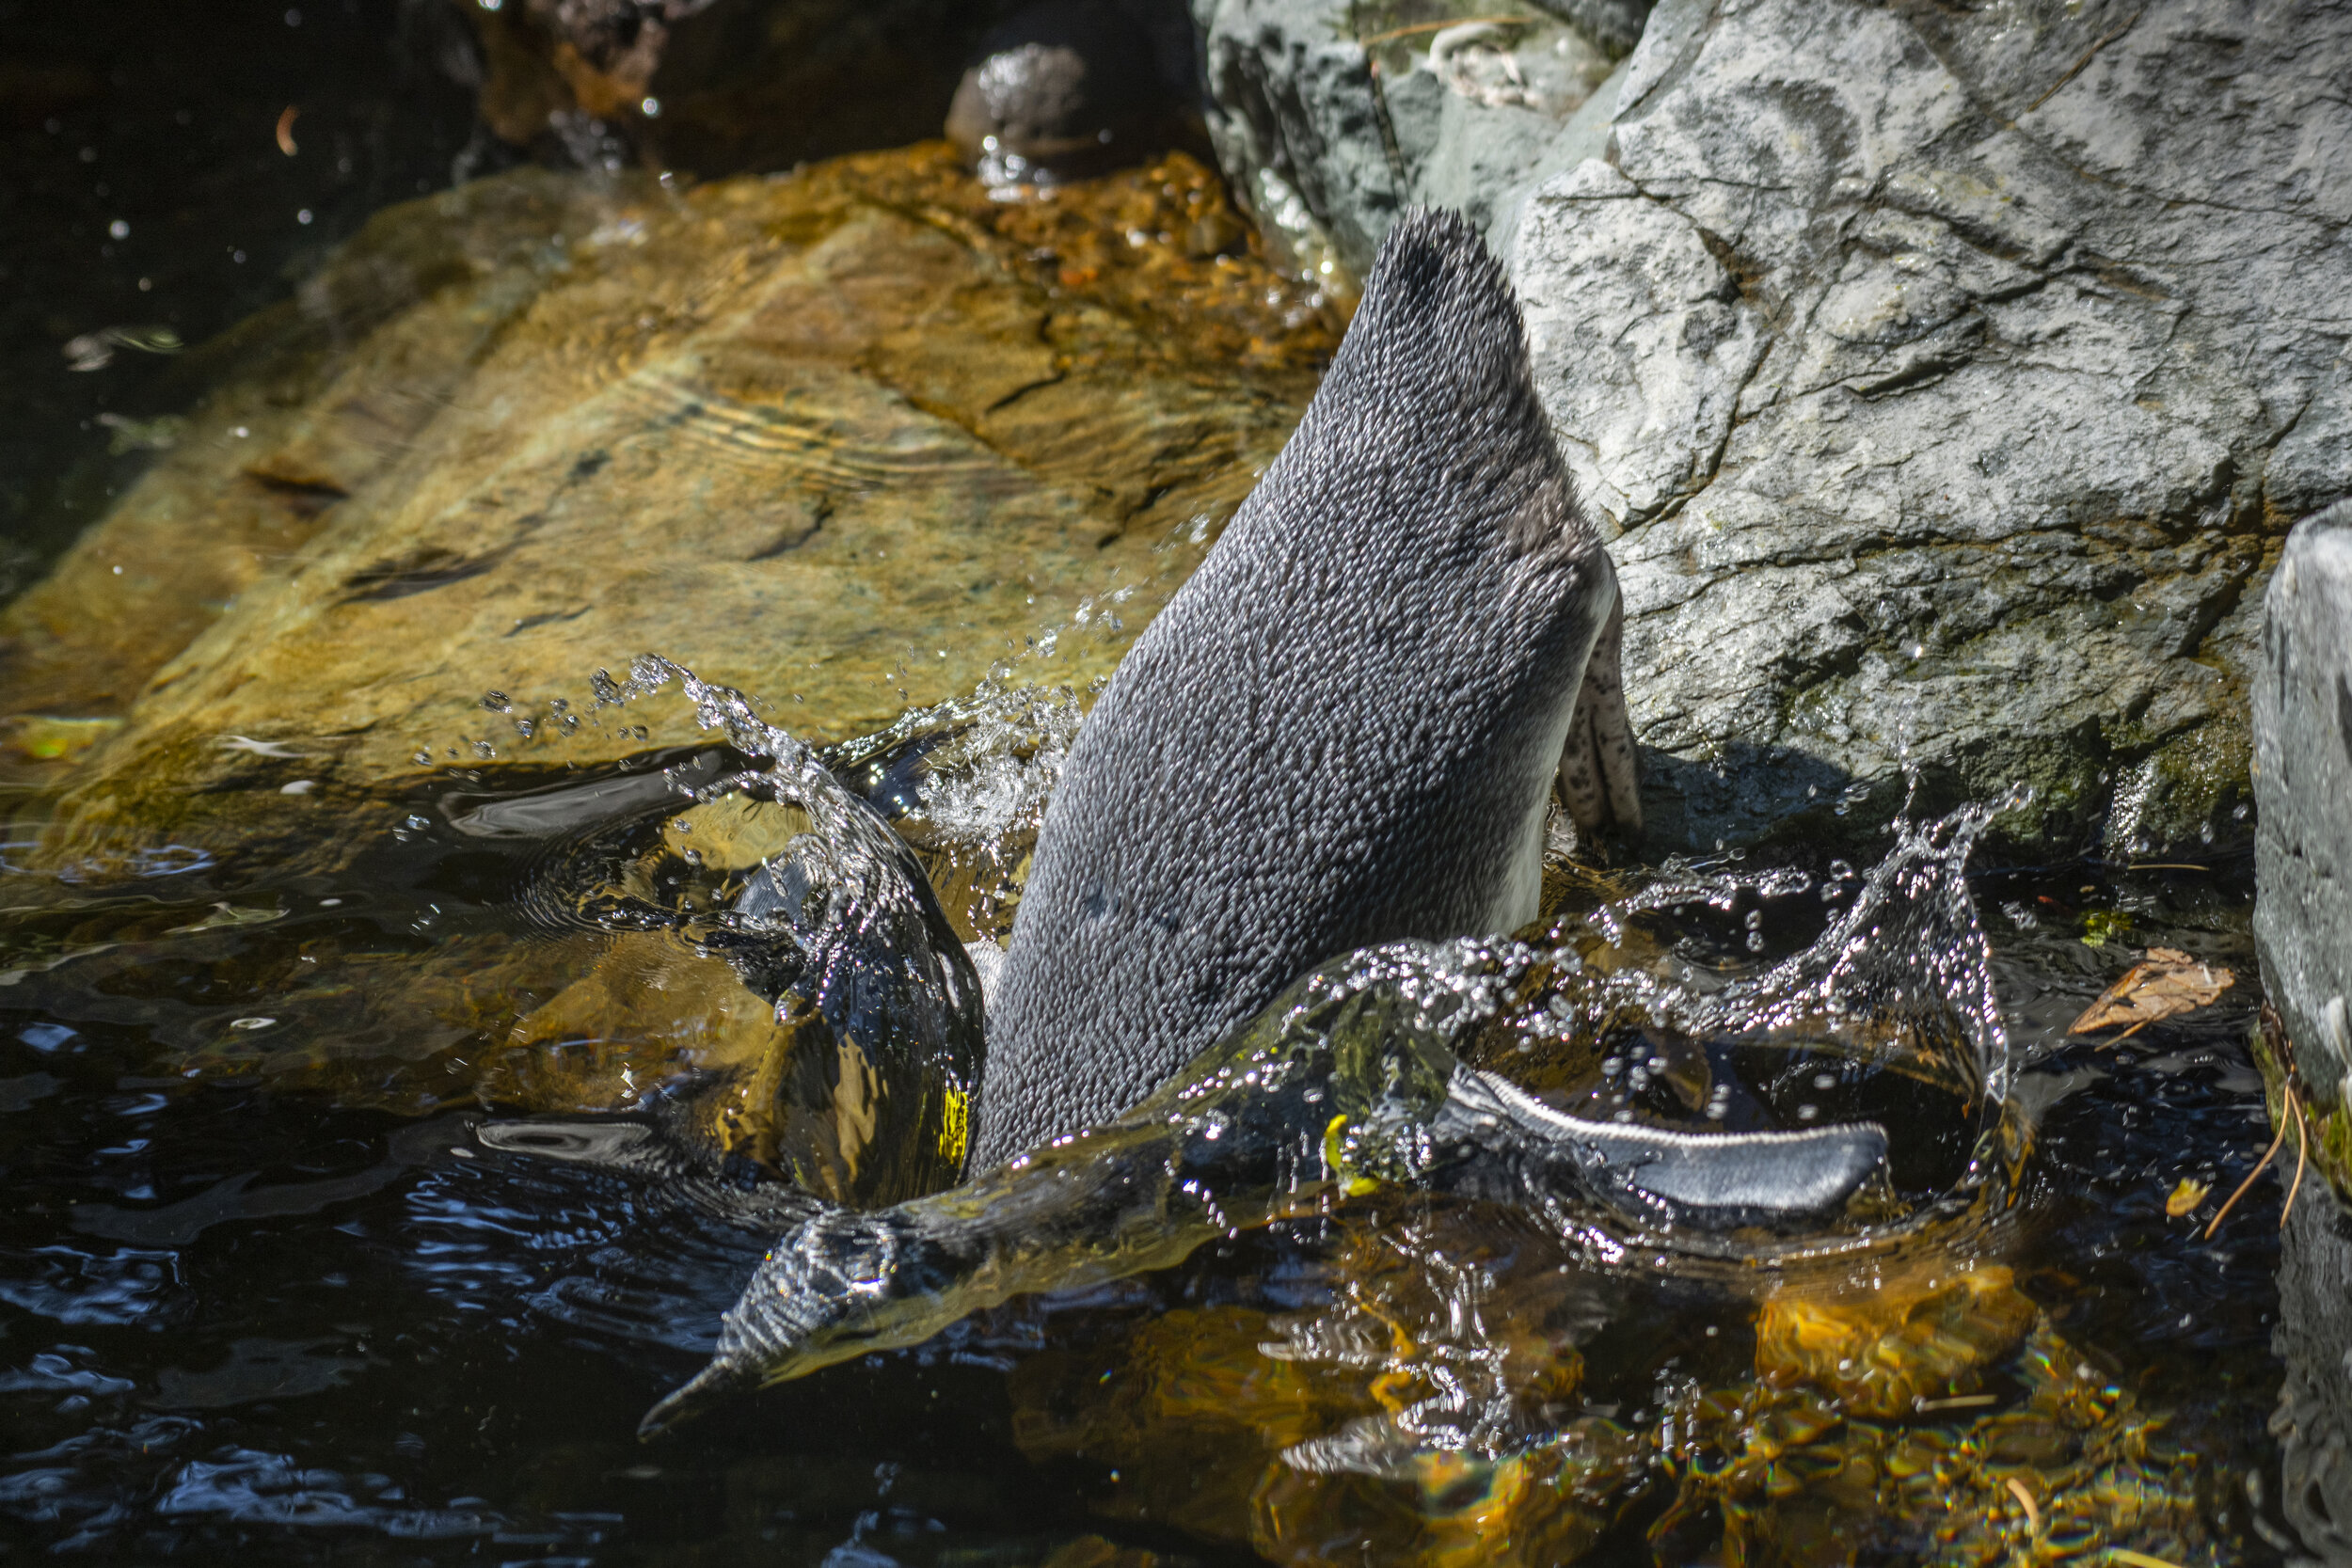  Magellanic penguin Amy dives into the water Aug. 17, 2020, at Point Defiance Zoo &amp; Aquarium. 